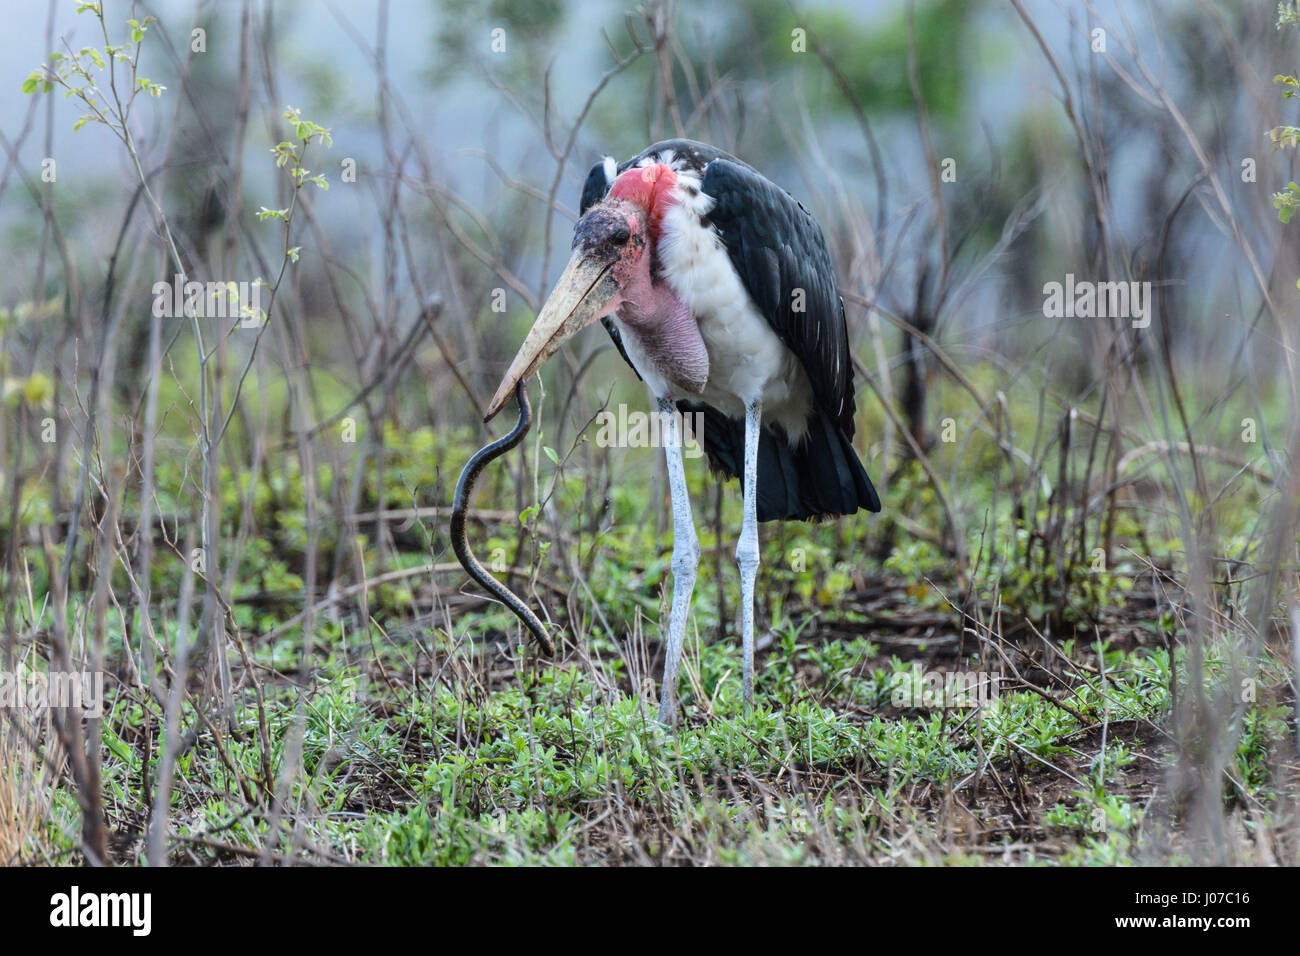 KRUGER NATIONAL PARK, SOUTH AFRICA: BIZARRE pictures by a British tourist show how there was no escape for this giant blind snake as it was swallowed alive by a hungry bird. The meal-time images show the snake struggle to get away after the Marabou Stork picks it up, but ultimately the huge waiting mouth is the only place to go. The images were captured by retired International Tax and Customs Consultant Ken Haley (63), from Newcastle-upon-Tyne, as he was in Kruger National Park, South Africa. Stock Photo